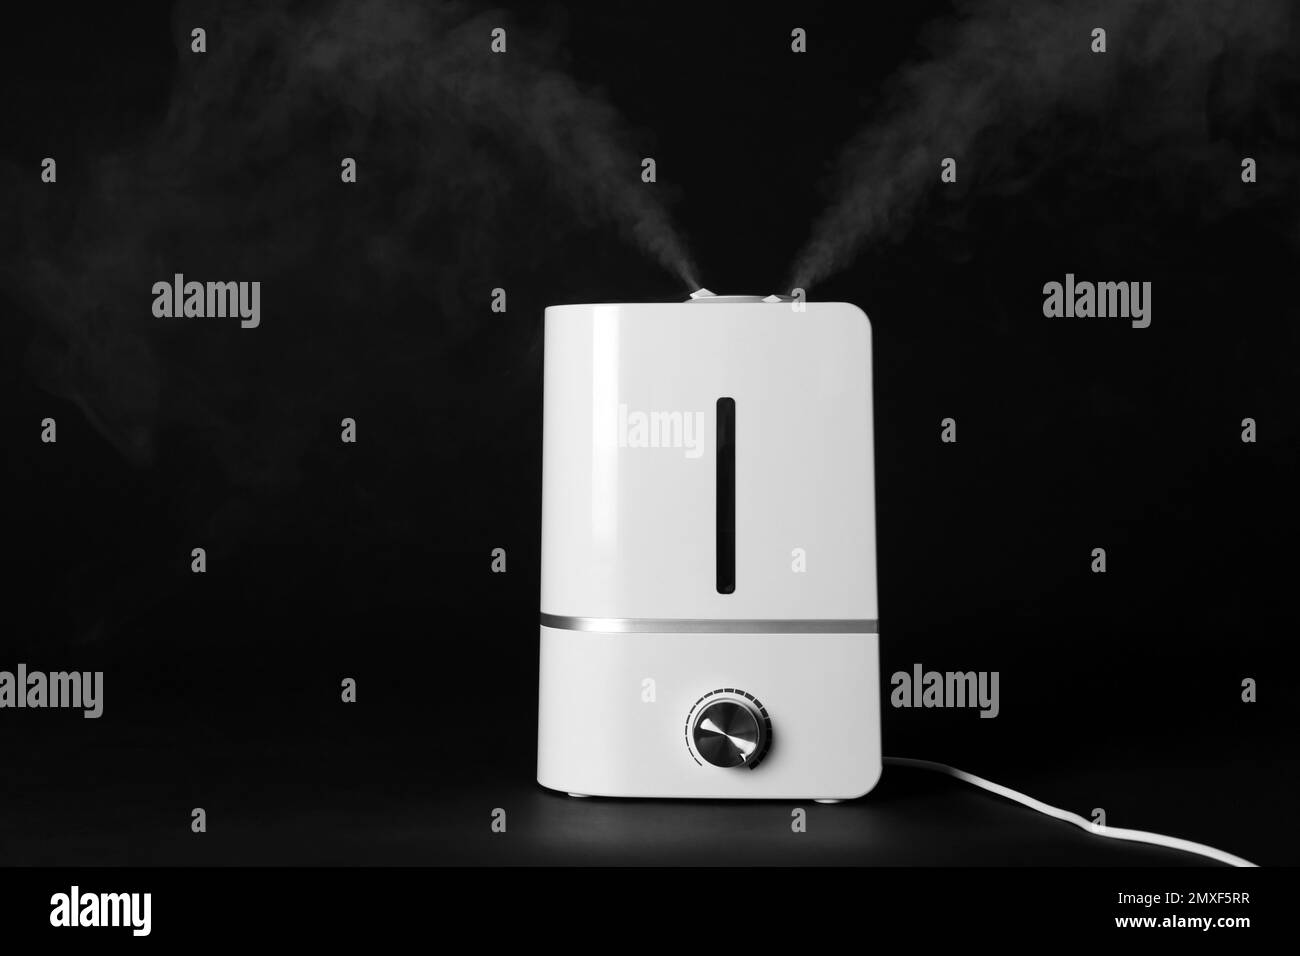 New modern air humidifier on black background Stock Photo